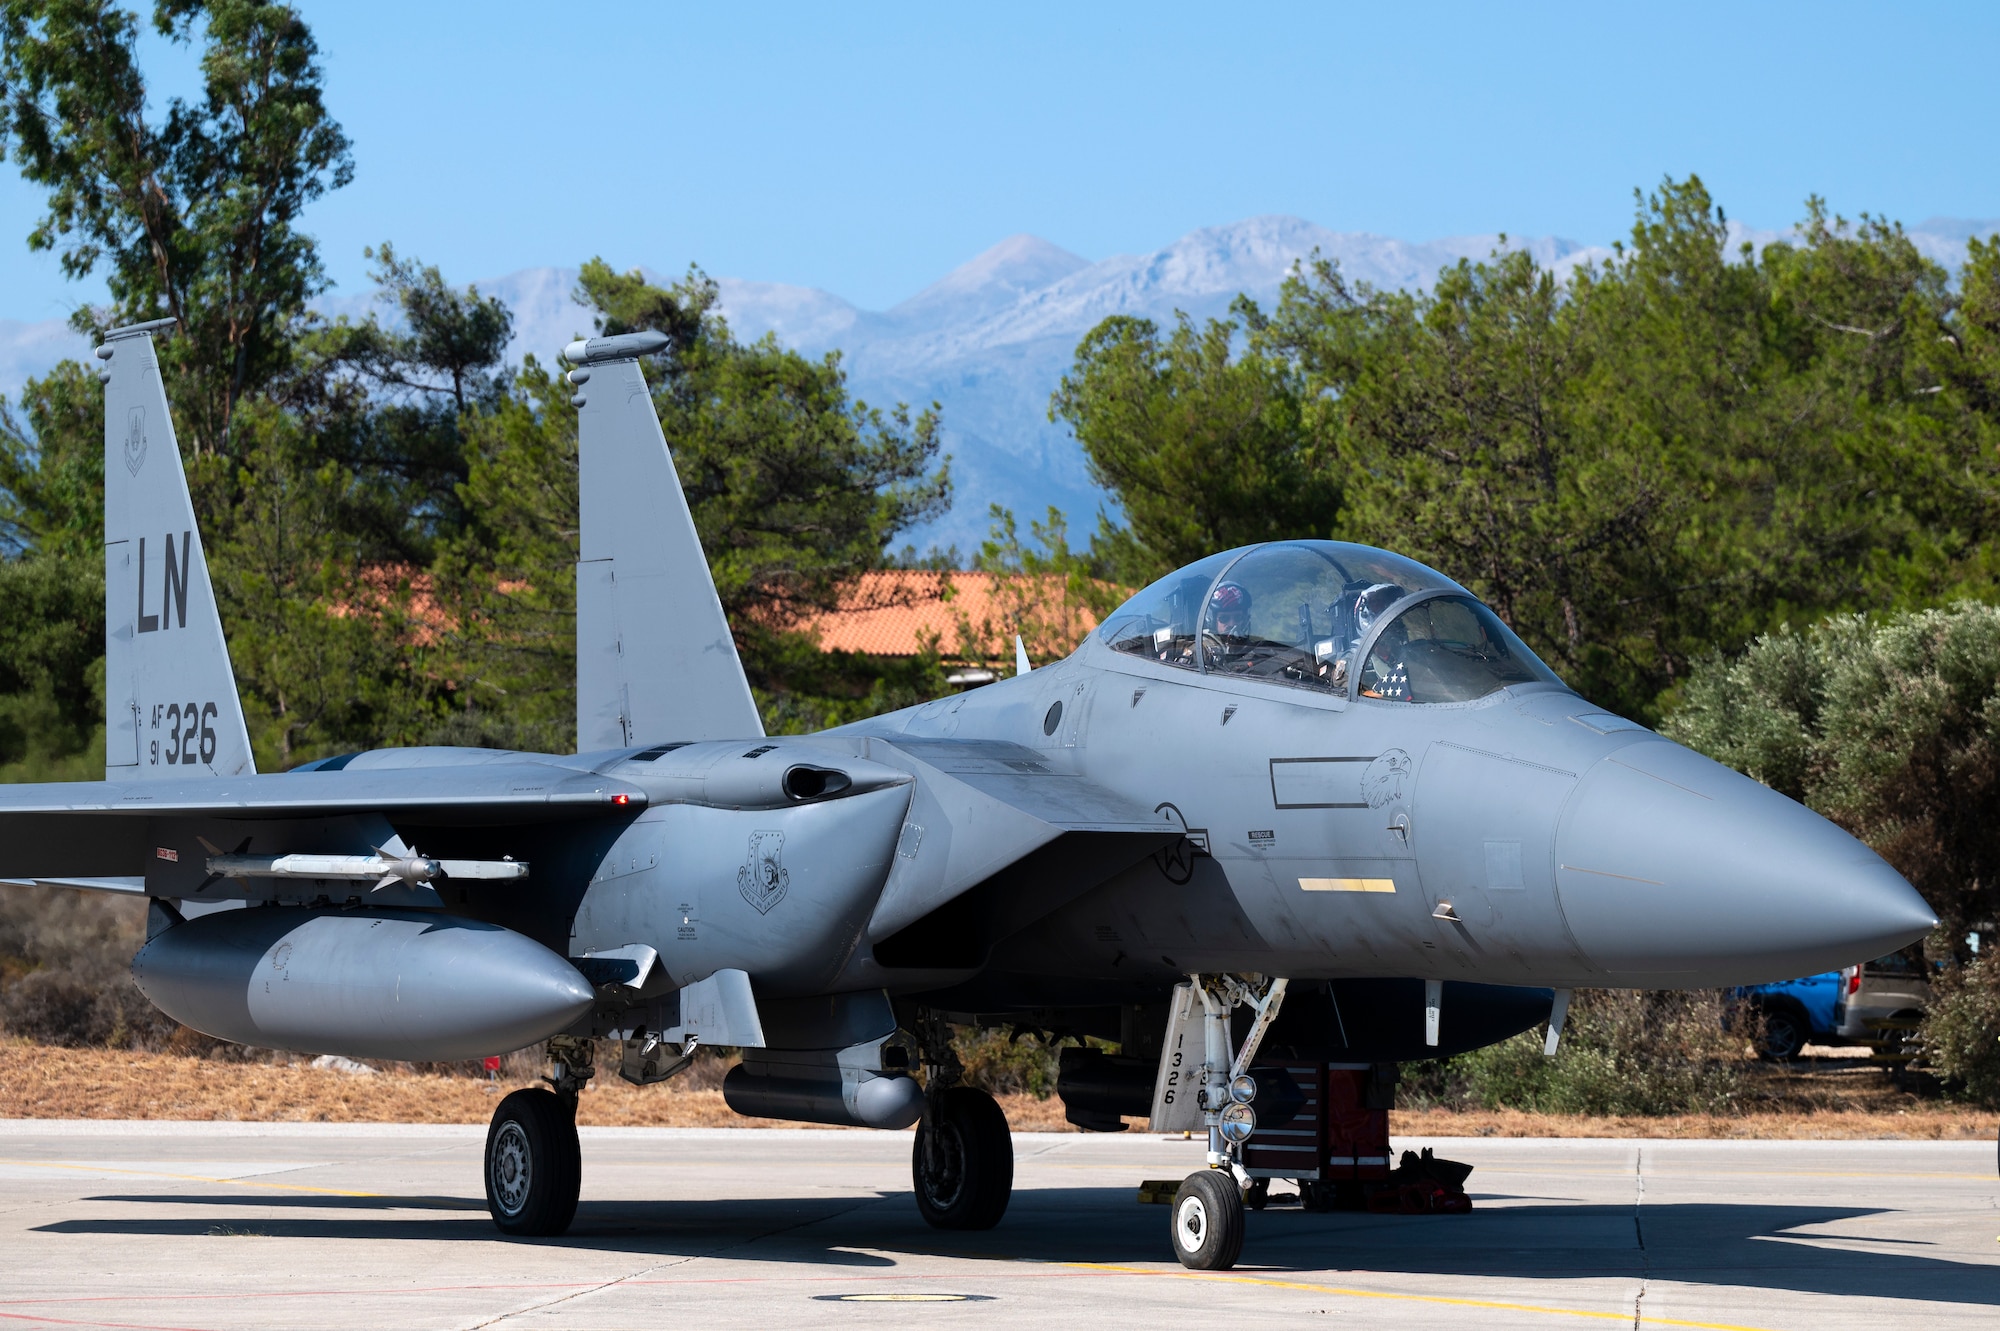 A U.S. Air Force F-15E Strike Eagle assigned to the 494th Fighter Squadron, from Royal Air Force Lakenheath, England, prepares to taxi prior to takeoff at Souda Air Base, Greece, July 15, 2022. The 494 FS flew two Strike Eagles from Souda AB to an undisclosed location within the U.S. Central Command area of responsibility, where the aircraft landed, refueled and returned the same day. (U.S. Air Force photo by Tech. Sgt. Rachel Maxwell)